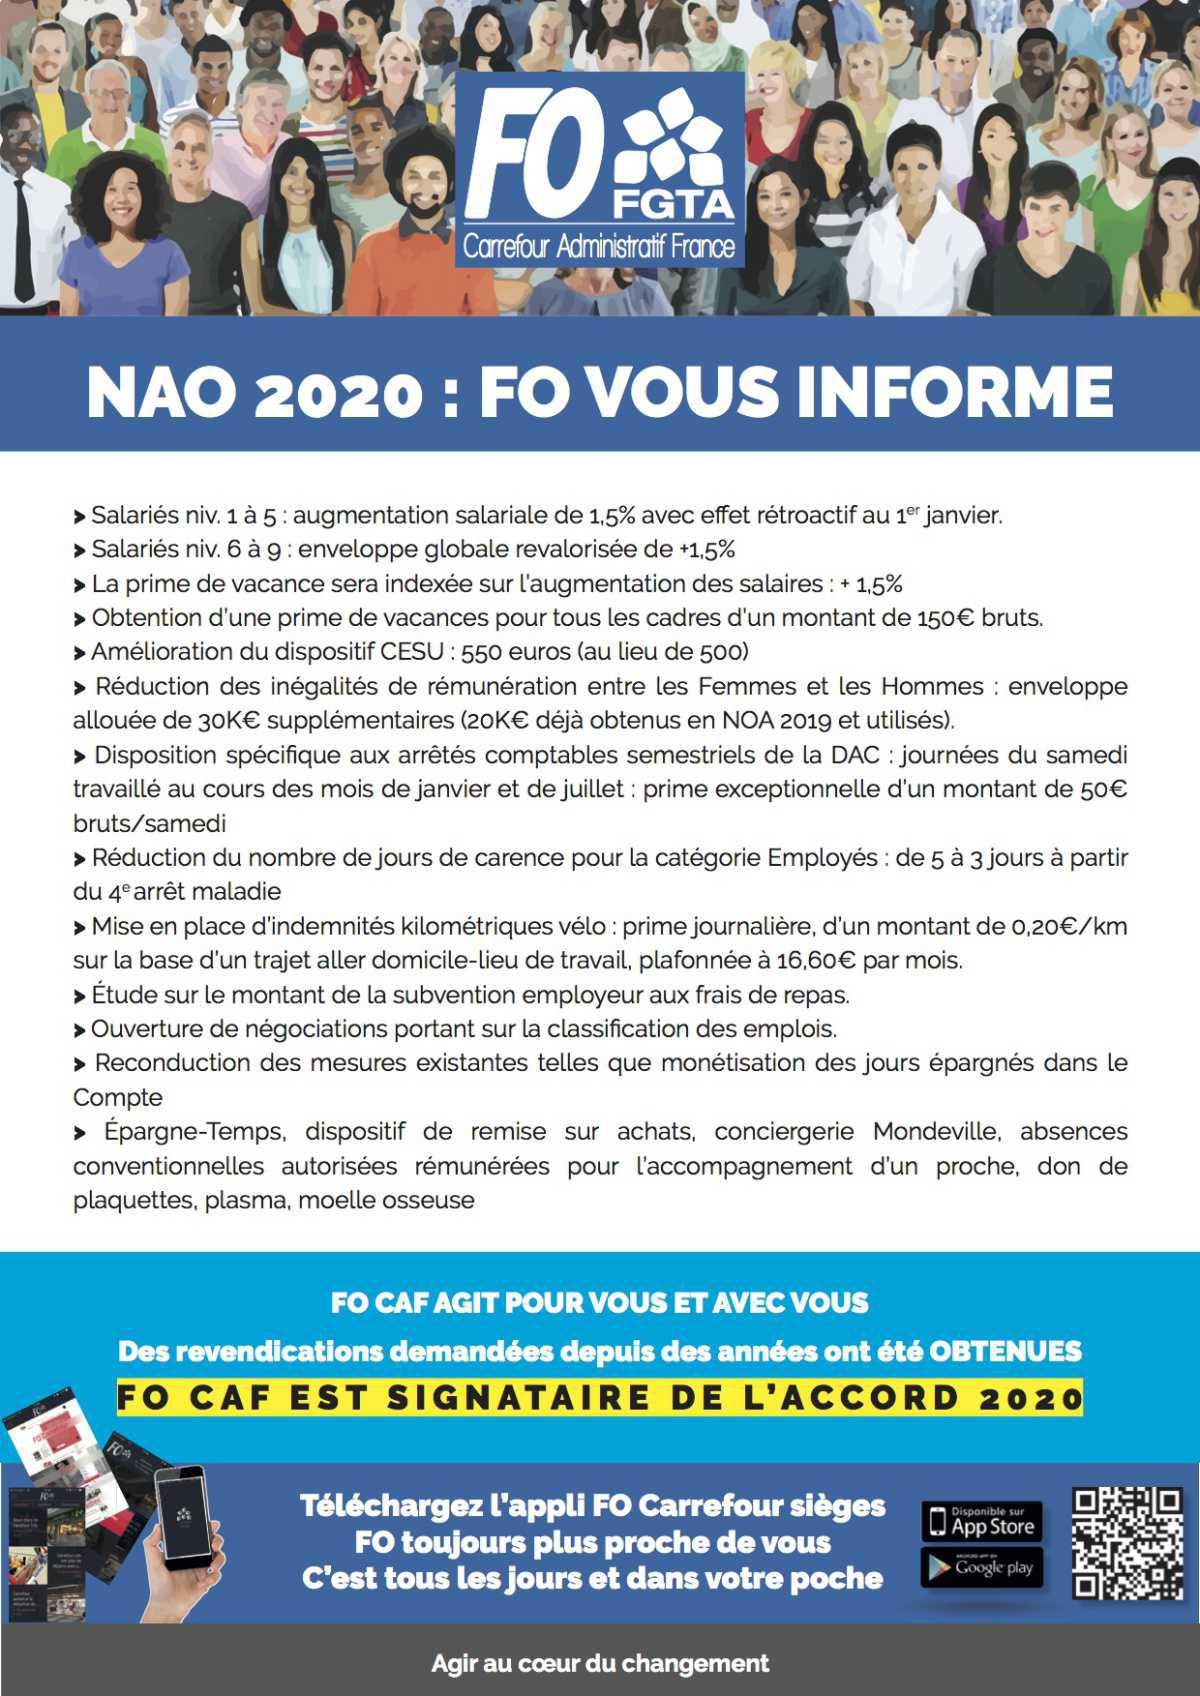 NAO 2020: FO CAF vous informe!